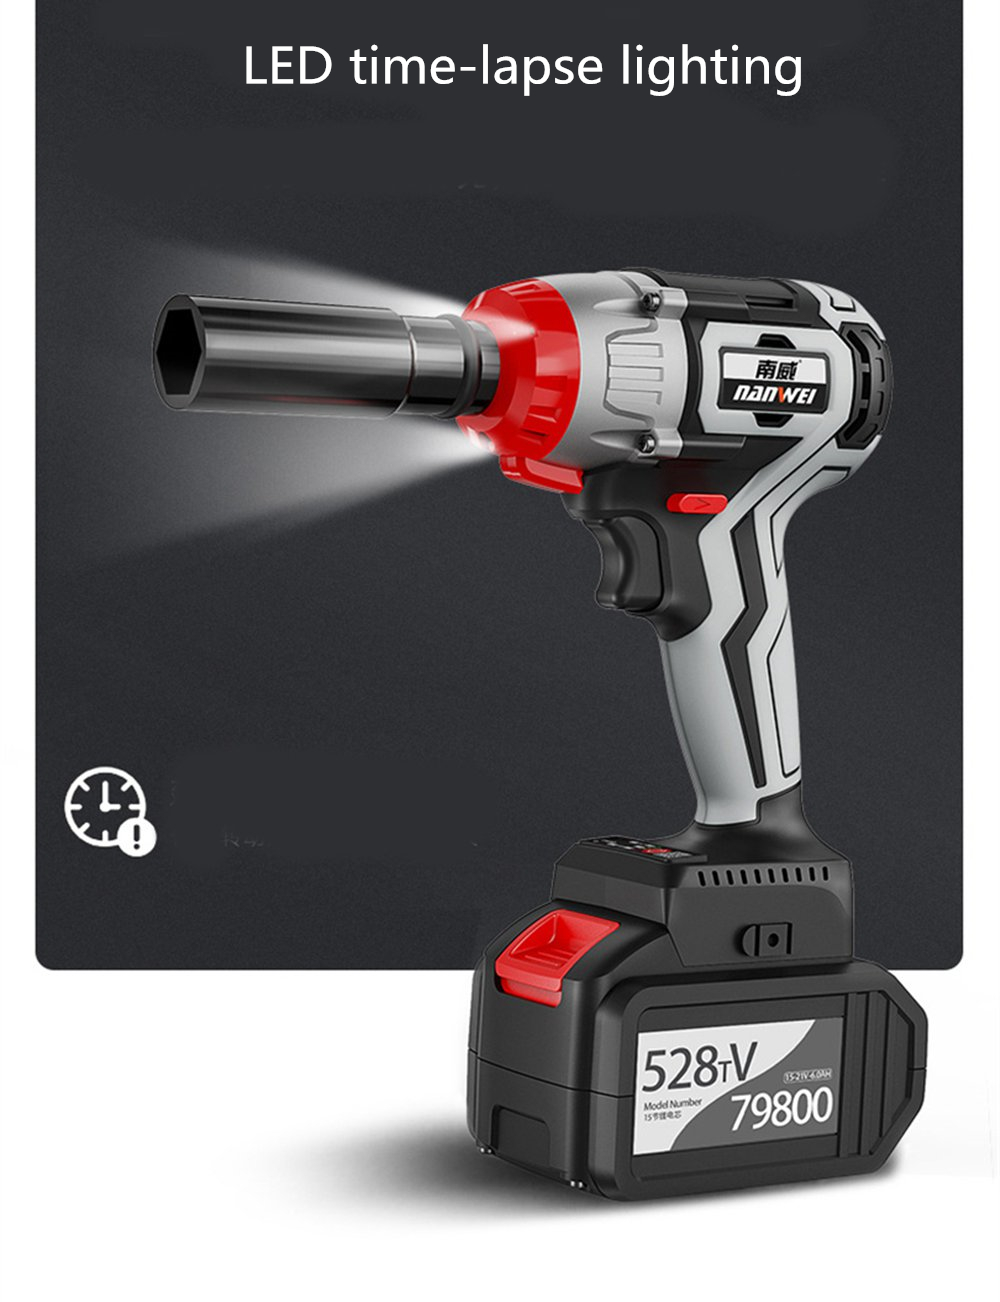 NANWEI-380NM-Brushless-Electric-Impact-Wrench-Adjustable-Speed-Regulation-With-60Ah-Lithium-Battery--1750113-6